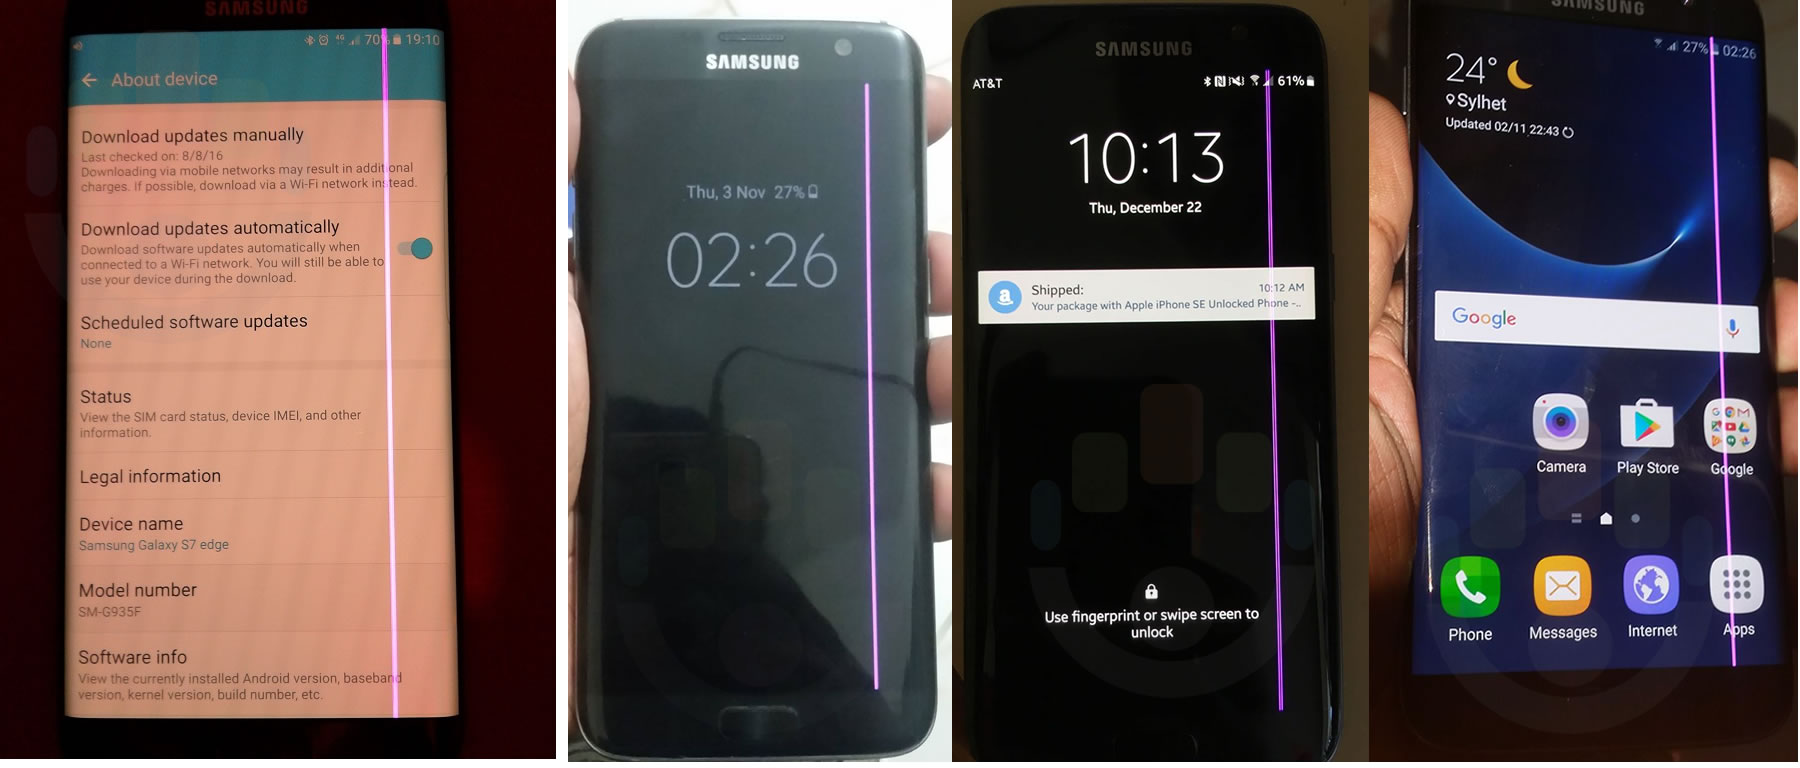 Samsung Galaxy S7 owners "pink line" display problem